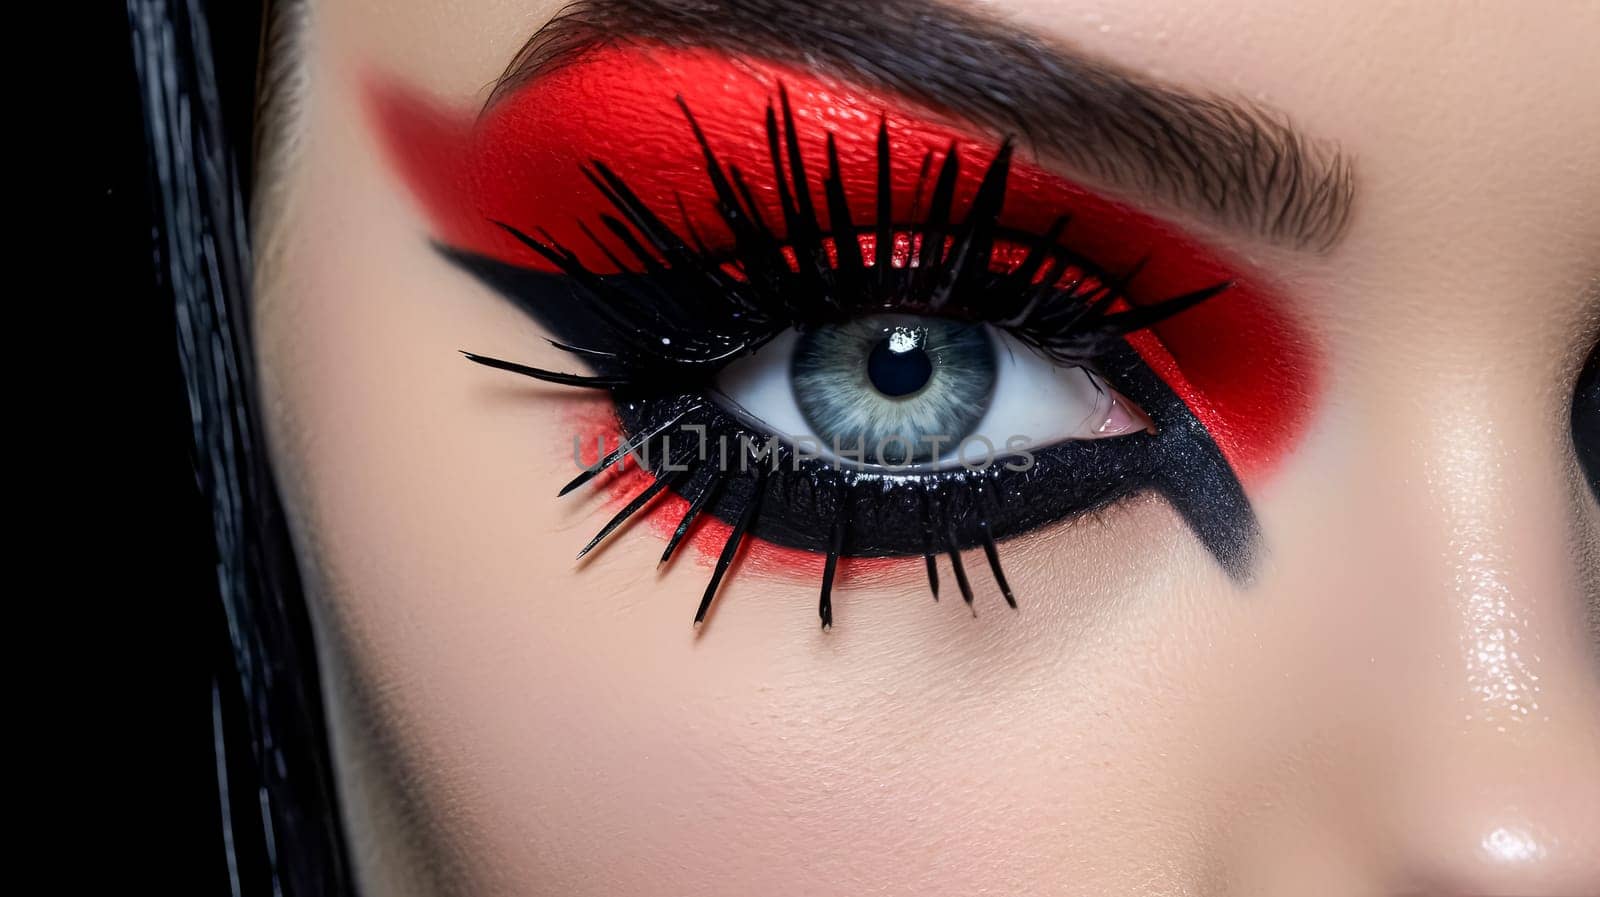 A woman's eye adorned with vibrant red and black eyeliner, showcasing a bold and striking evening makeup look.